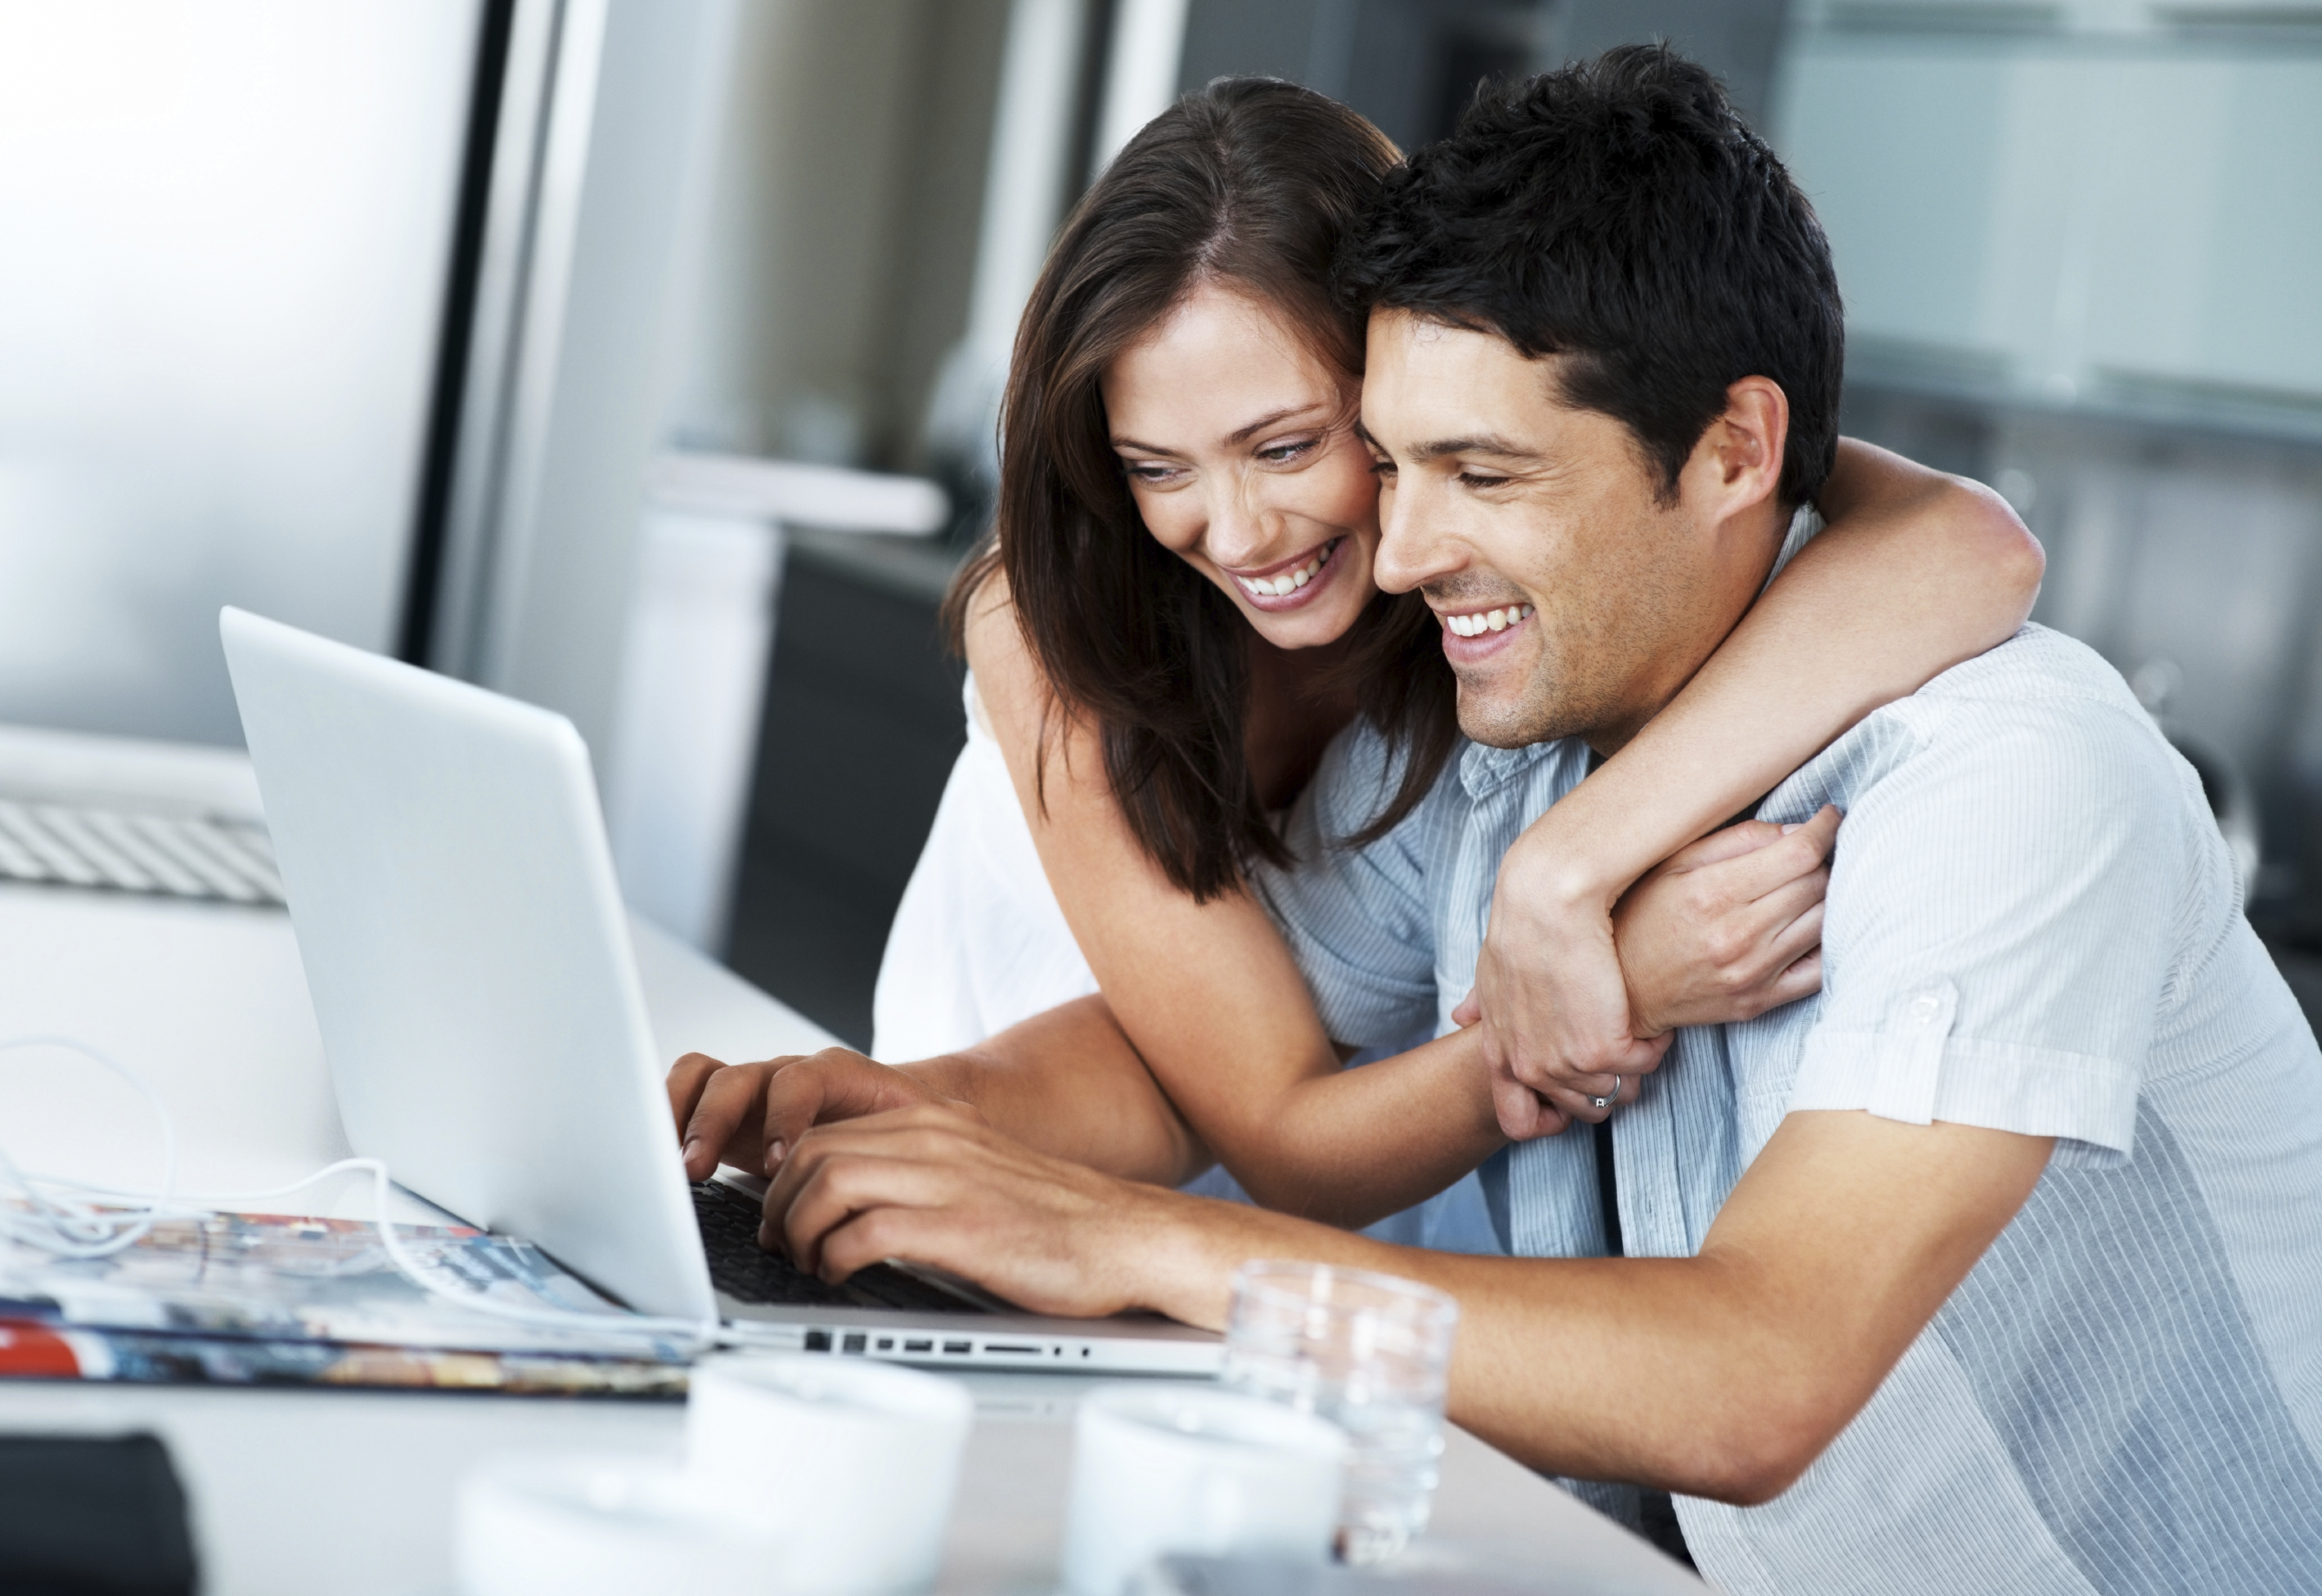 Portrait of a smiling young couple surfing internet on laptop in kitchen at home